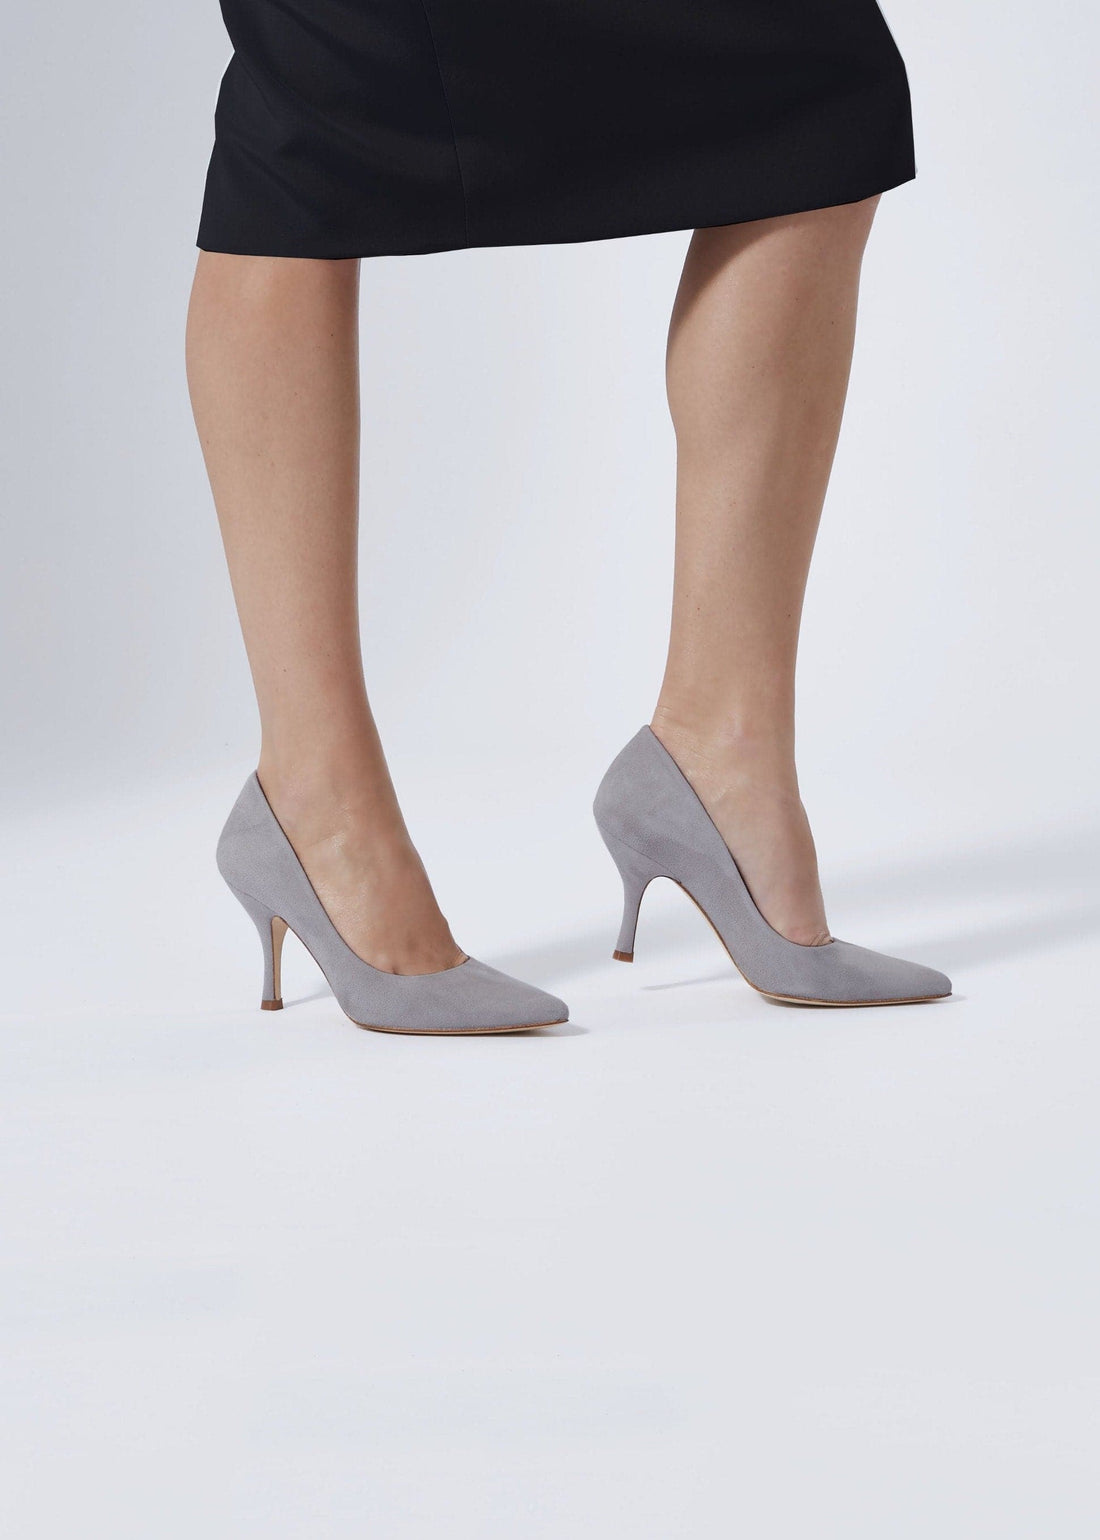 Olivia Steel Fashion Shoe Grey Suede Pointed Court Shoes